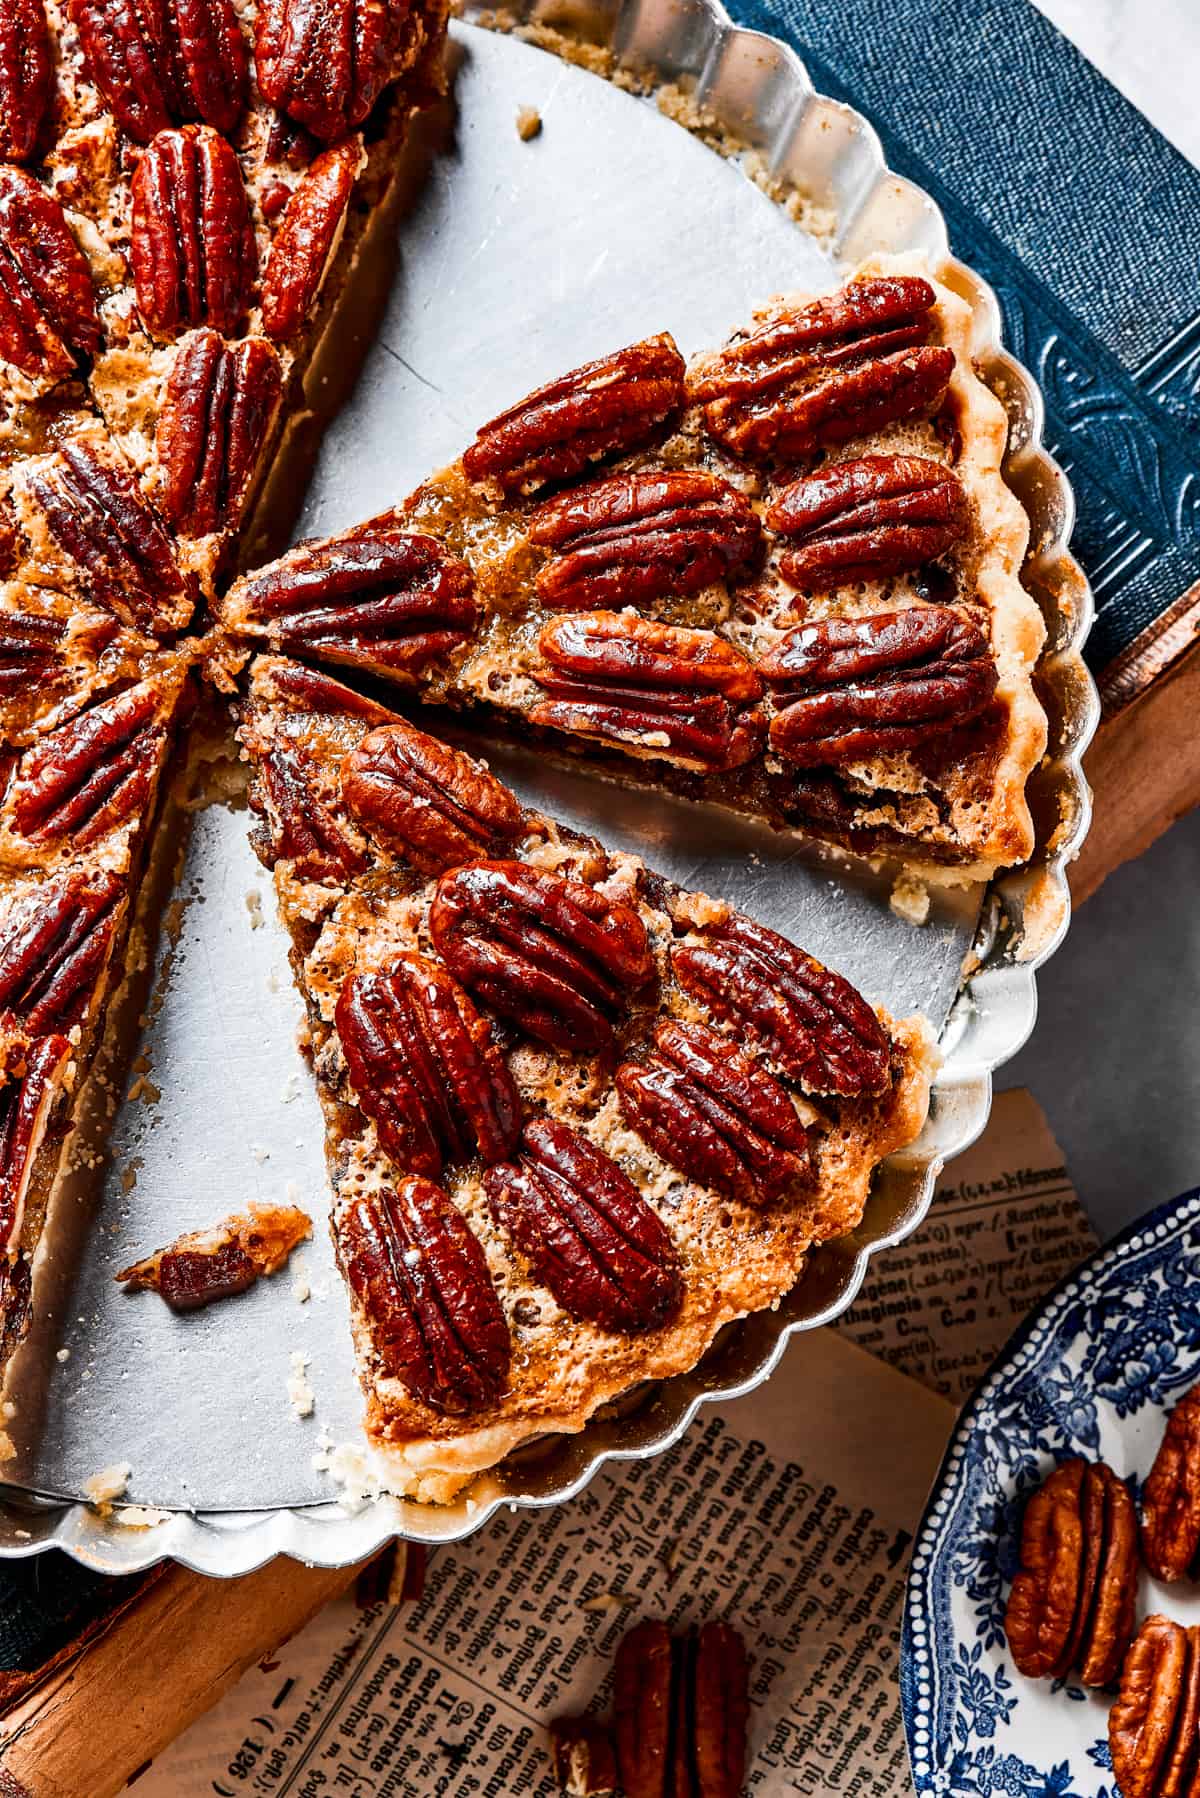 A pie dish with several slices of pecan pie left in it.